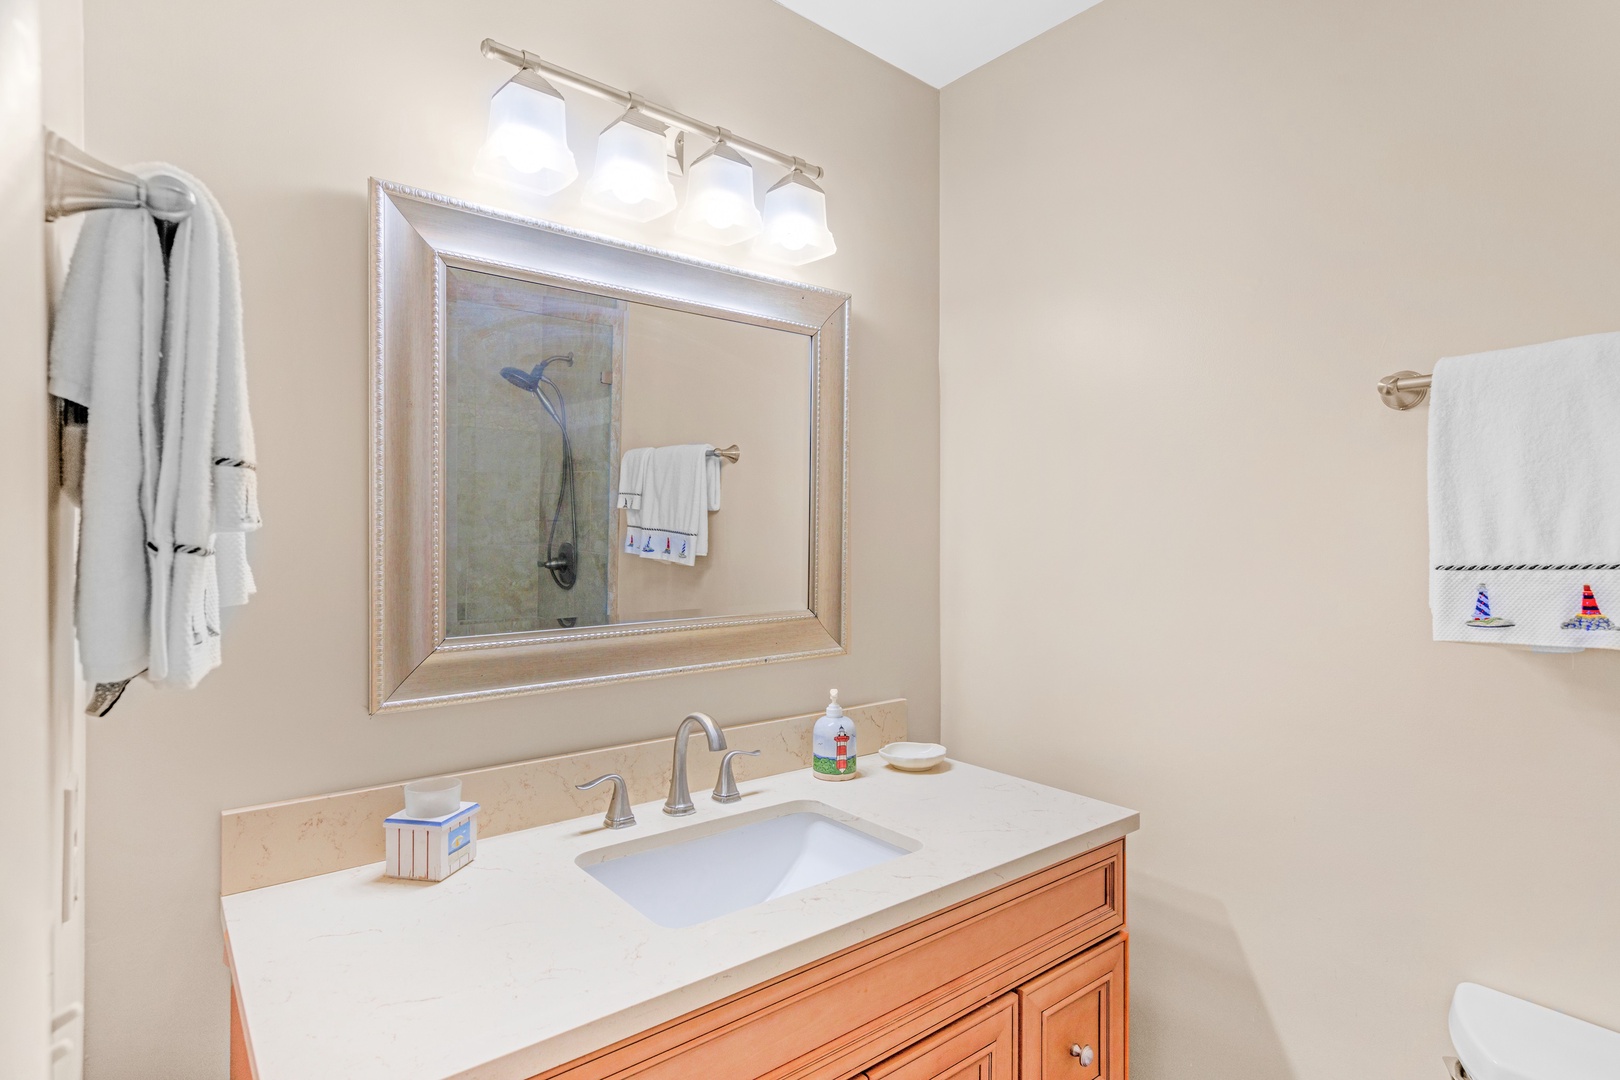 The private king ensuite offers a single vanity & shower